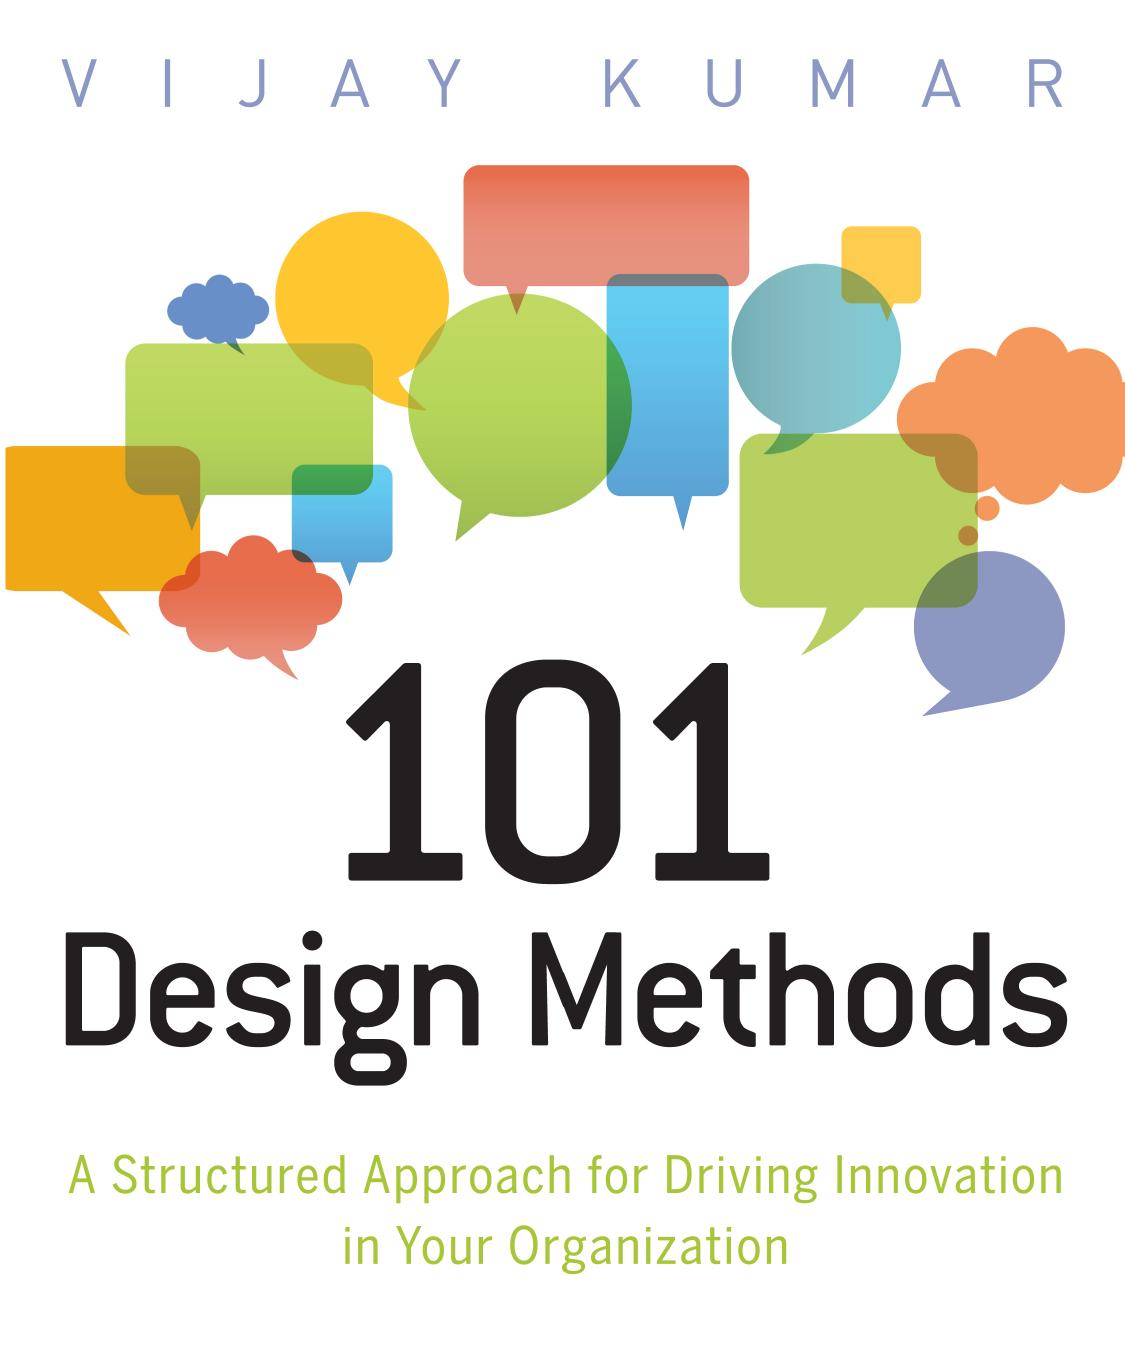 101 Design Methods_ A Structured Approach for Driving Innovation in Your Organization - Vijay Kumar.jpg